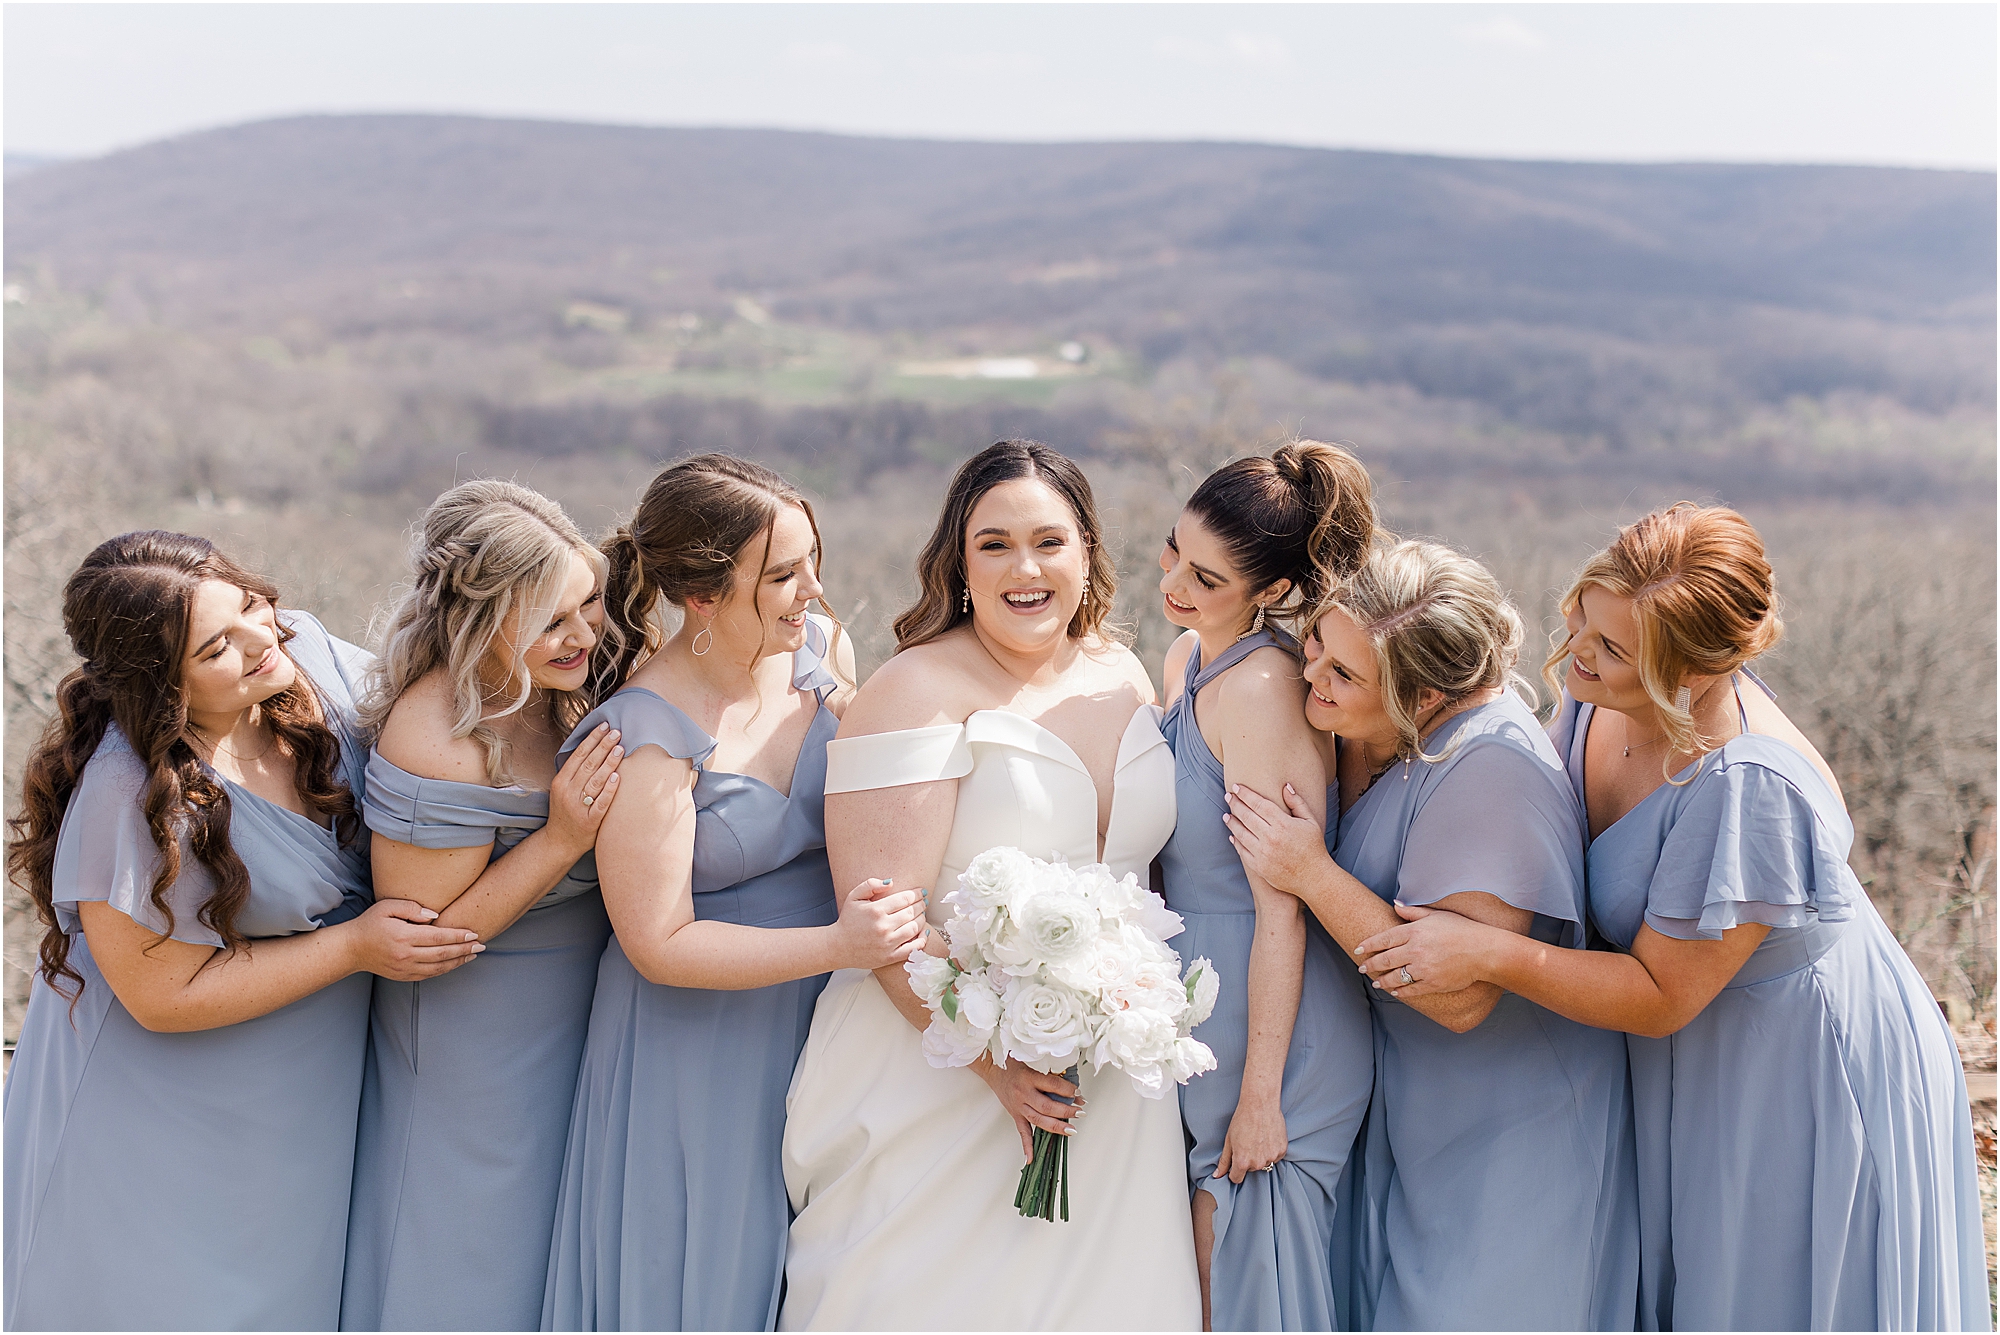 The bridesmaids at a Dream Point Ranch Wedding.